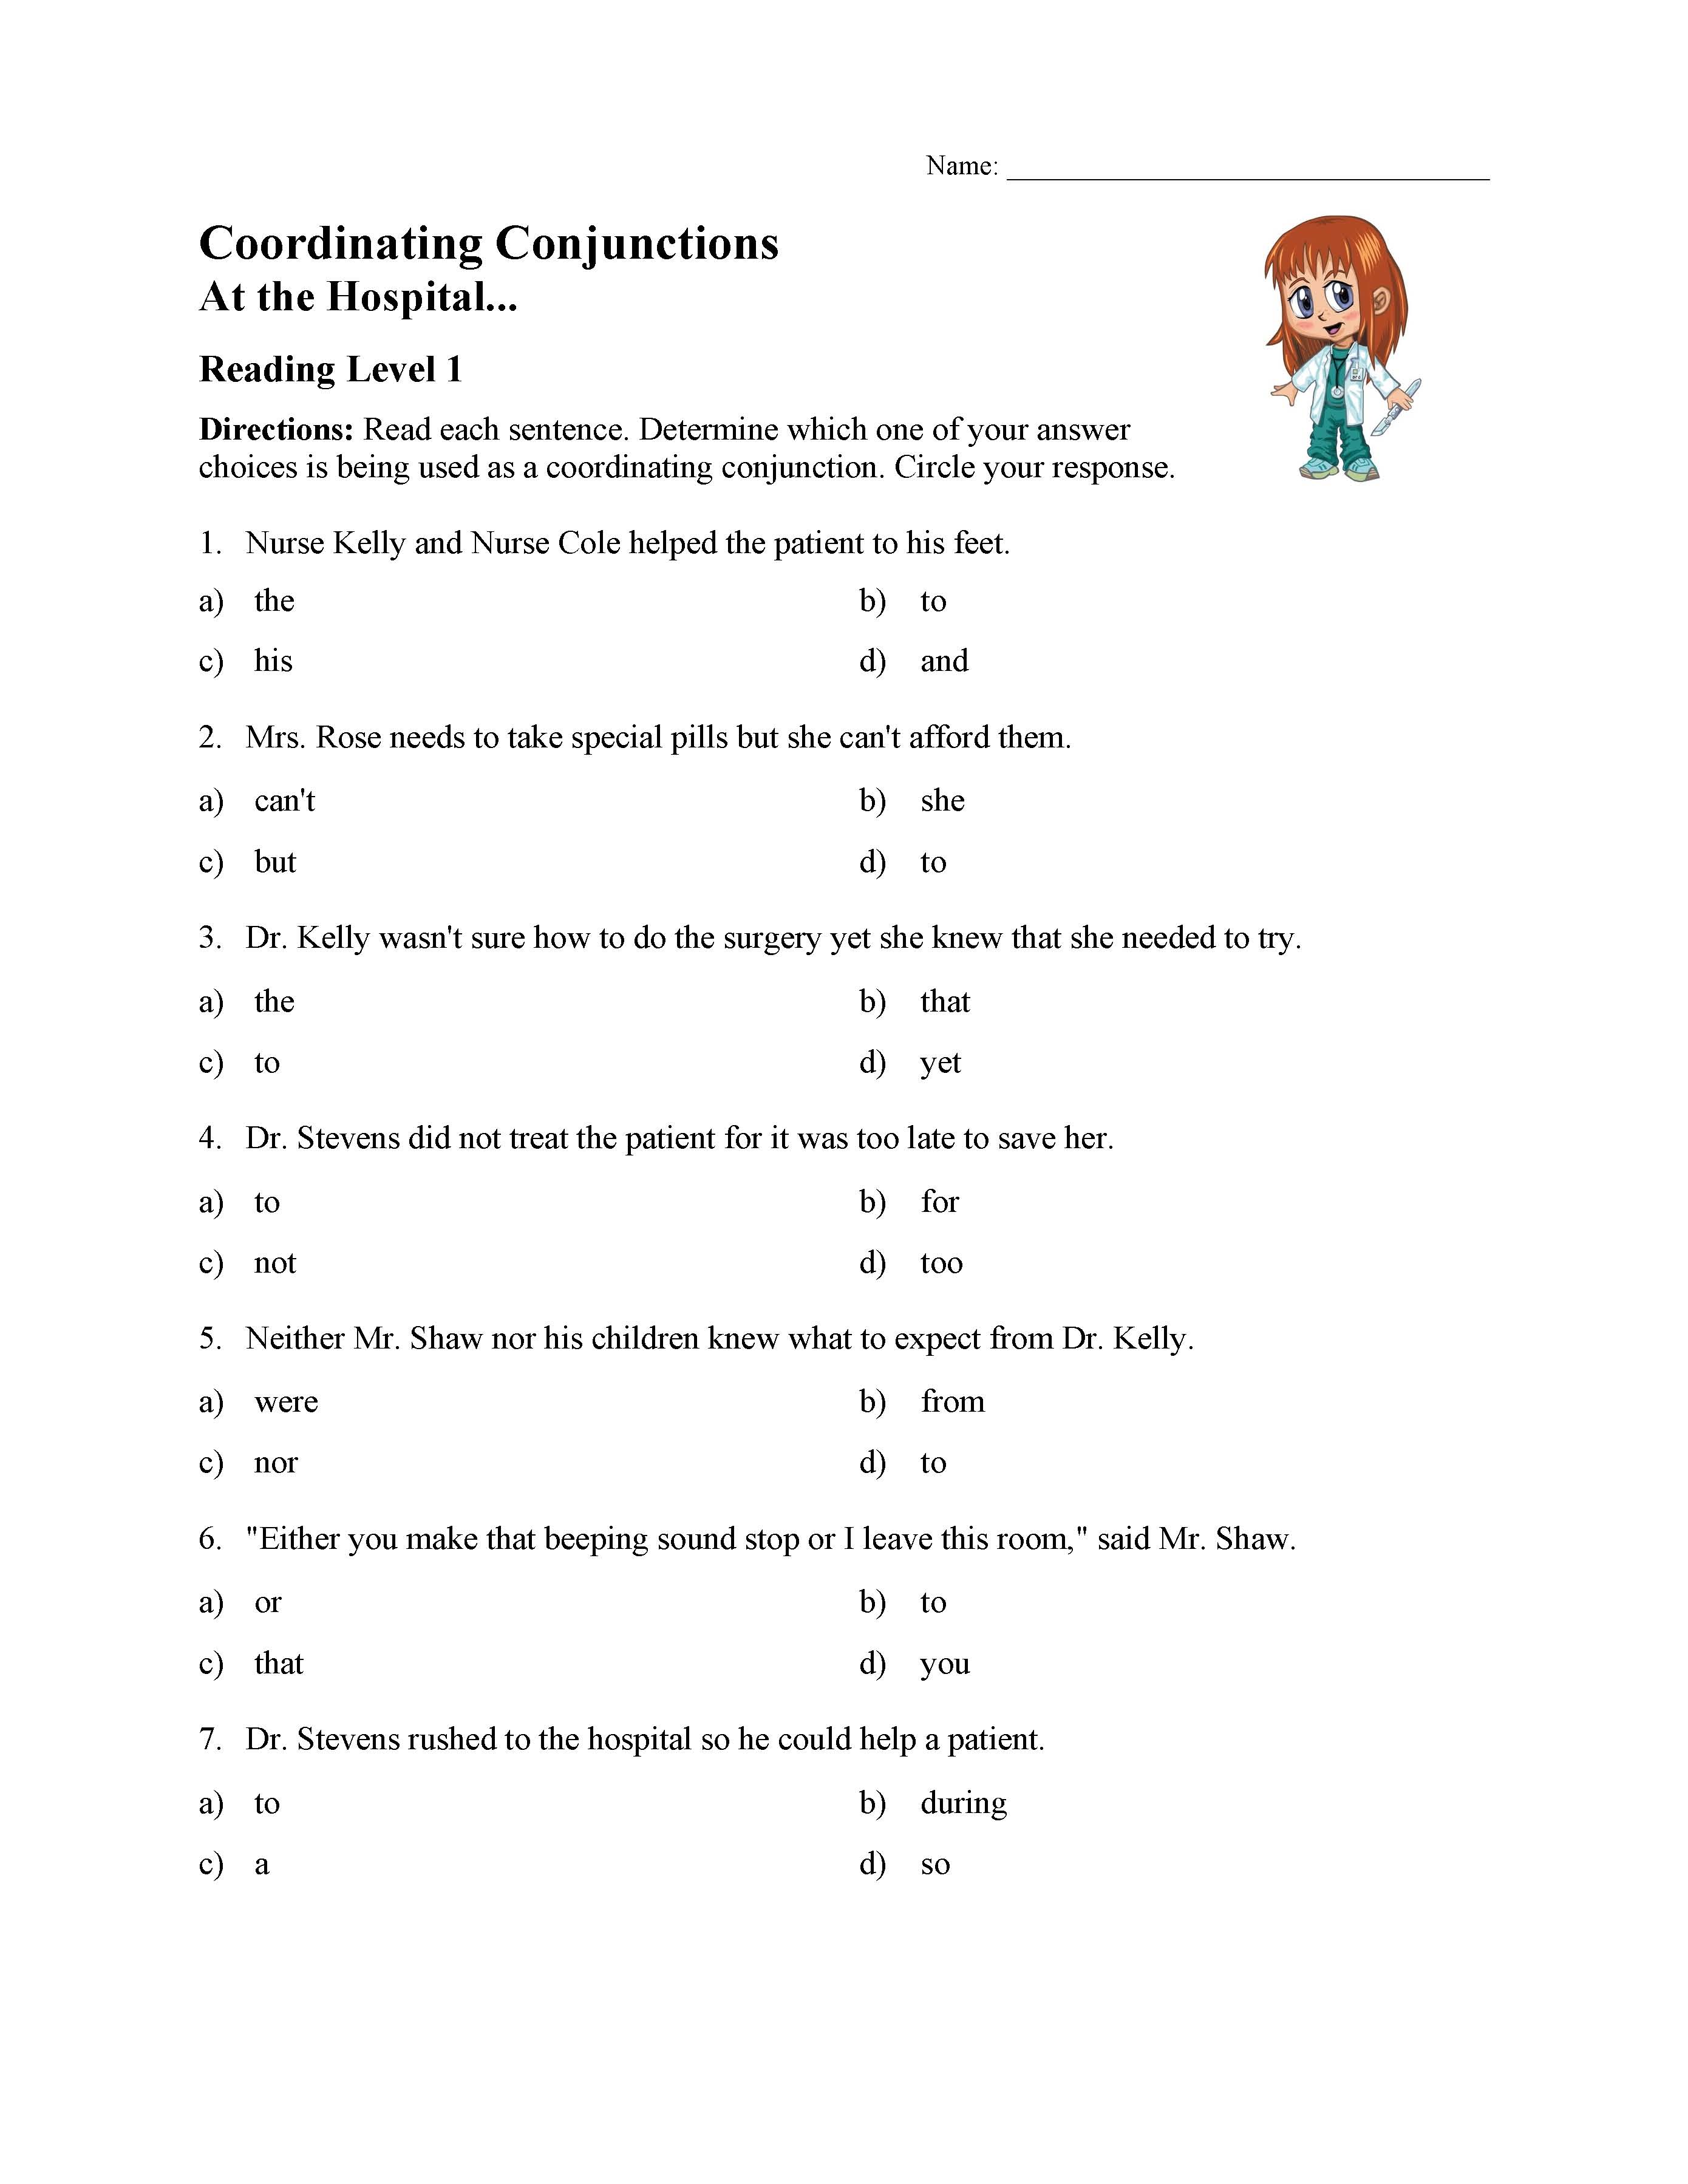 This is a preview image of the Coordinating Conjunctions Worksheet - Reading Level 1.